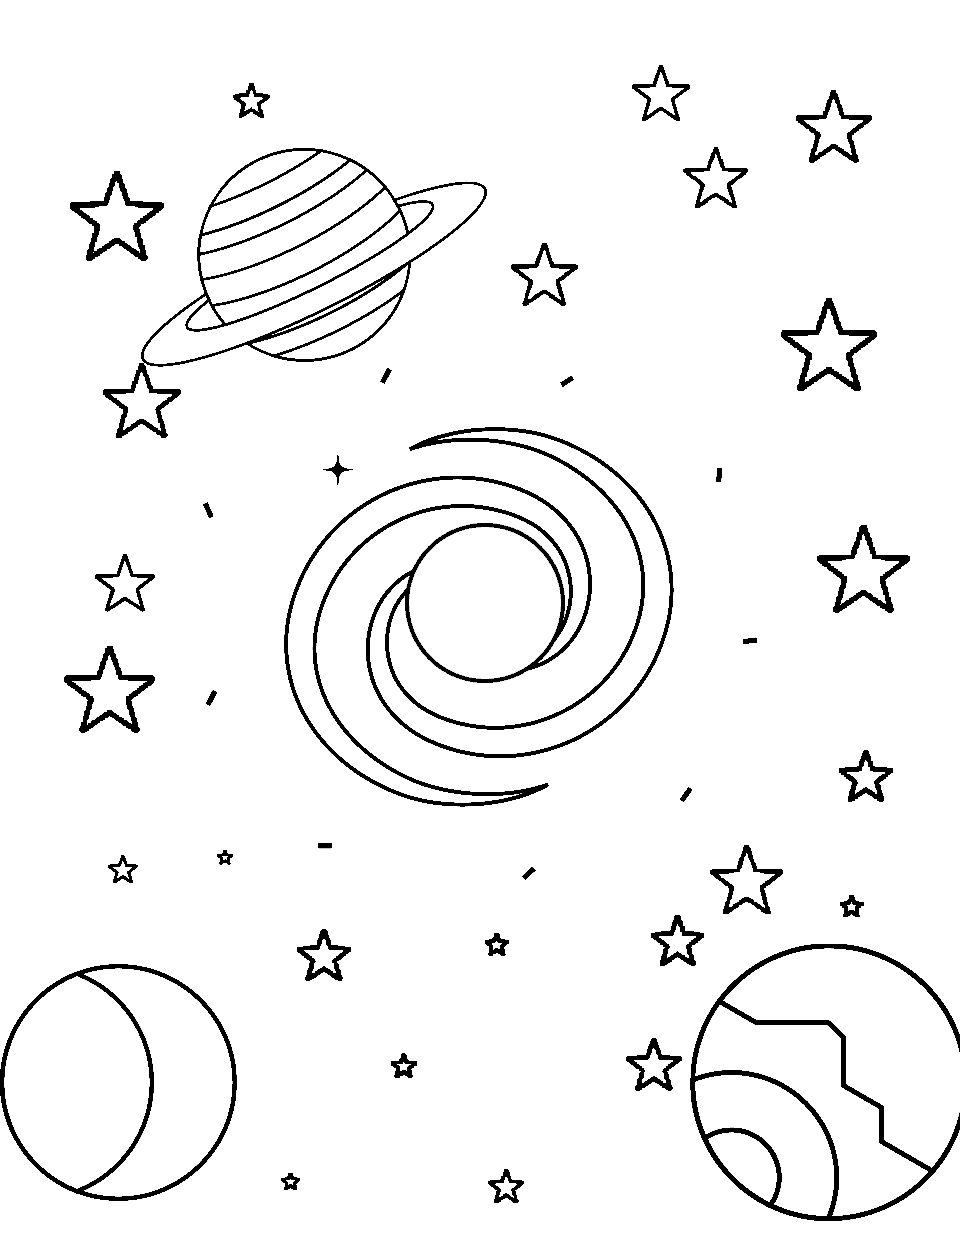 Easy-to-Color Universe Coloring Page - Basic shapes representing stars, planets, and galaxies.